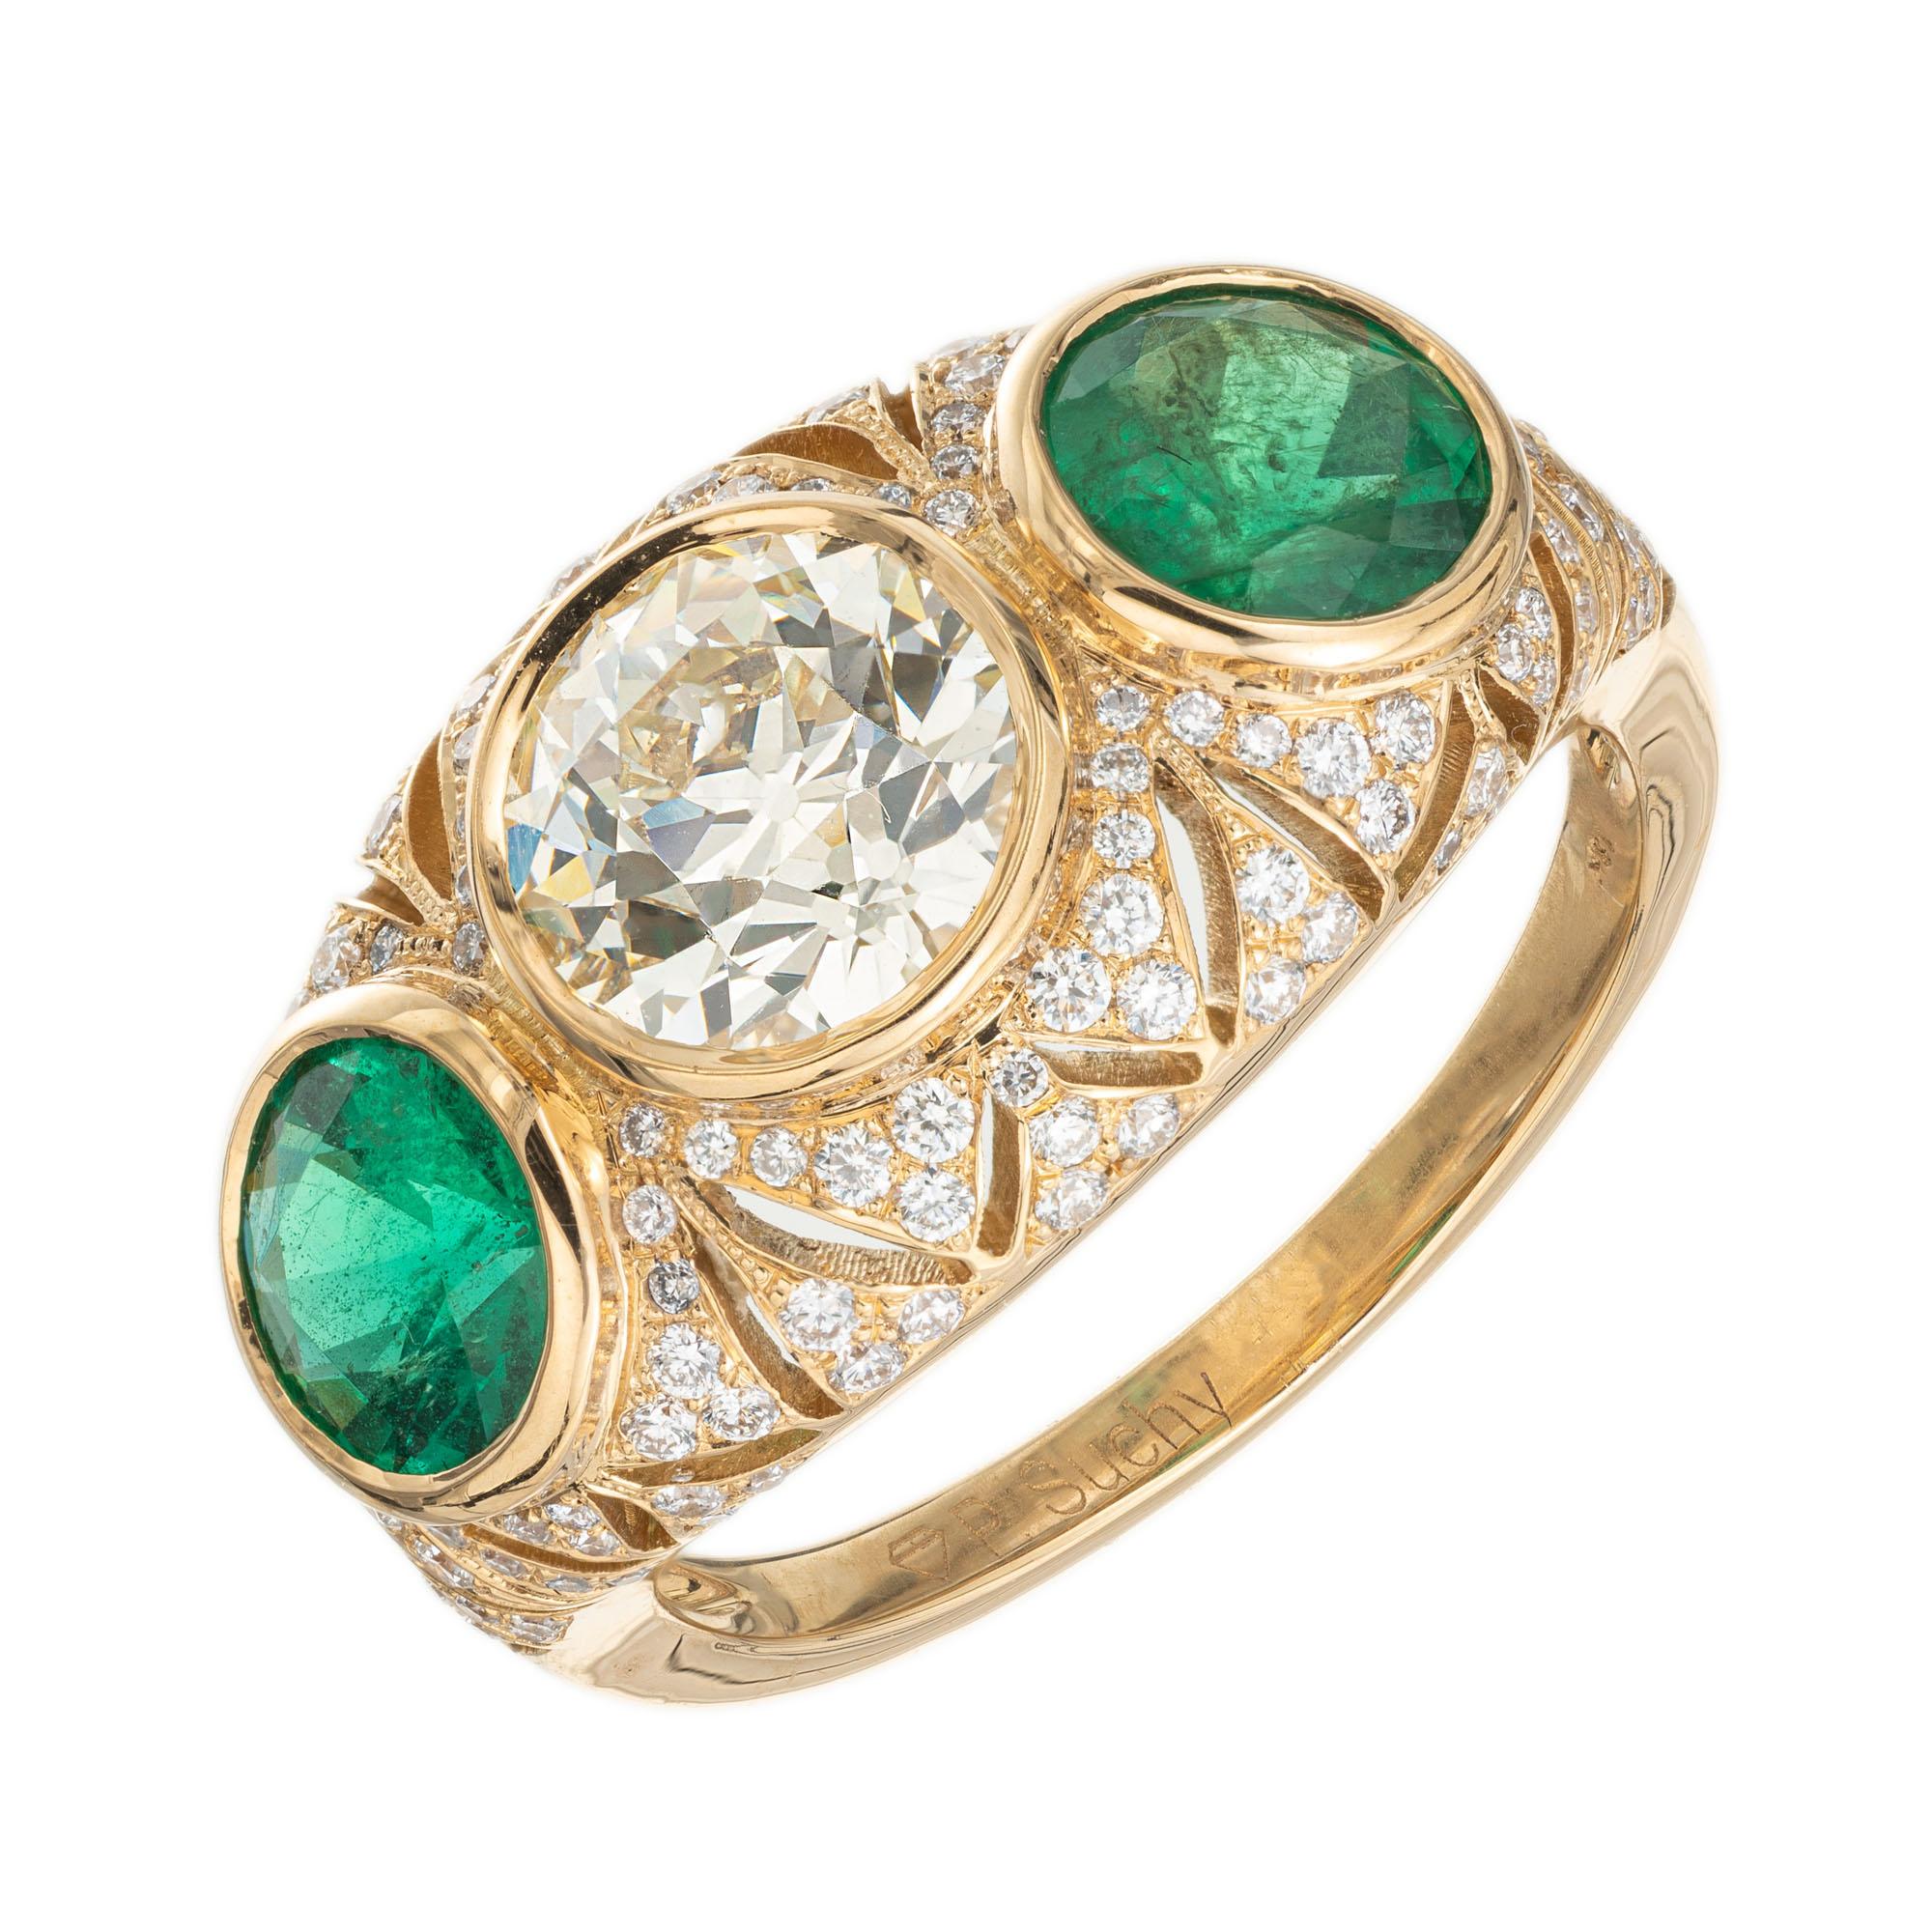 Peter Suchy antique inspired handmade diamond and emerald ring. GIA certified Old European cut center diamond with 2 round emerald side stones in a 18k yellow gold three-stone setting with 130 round brilliant cut diamonds.  Some history- this was a